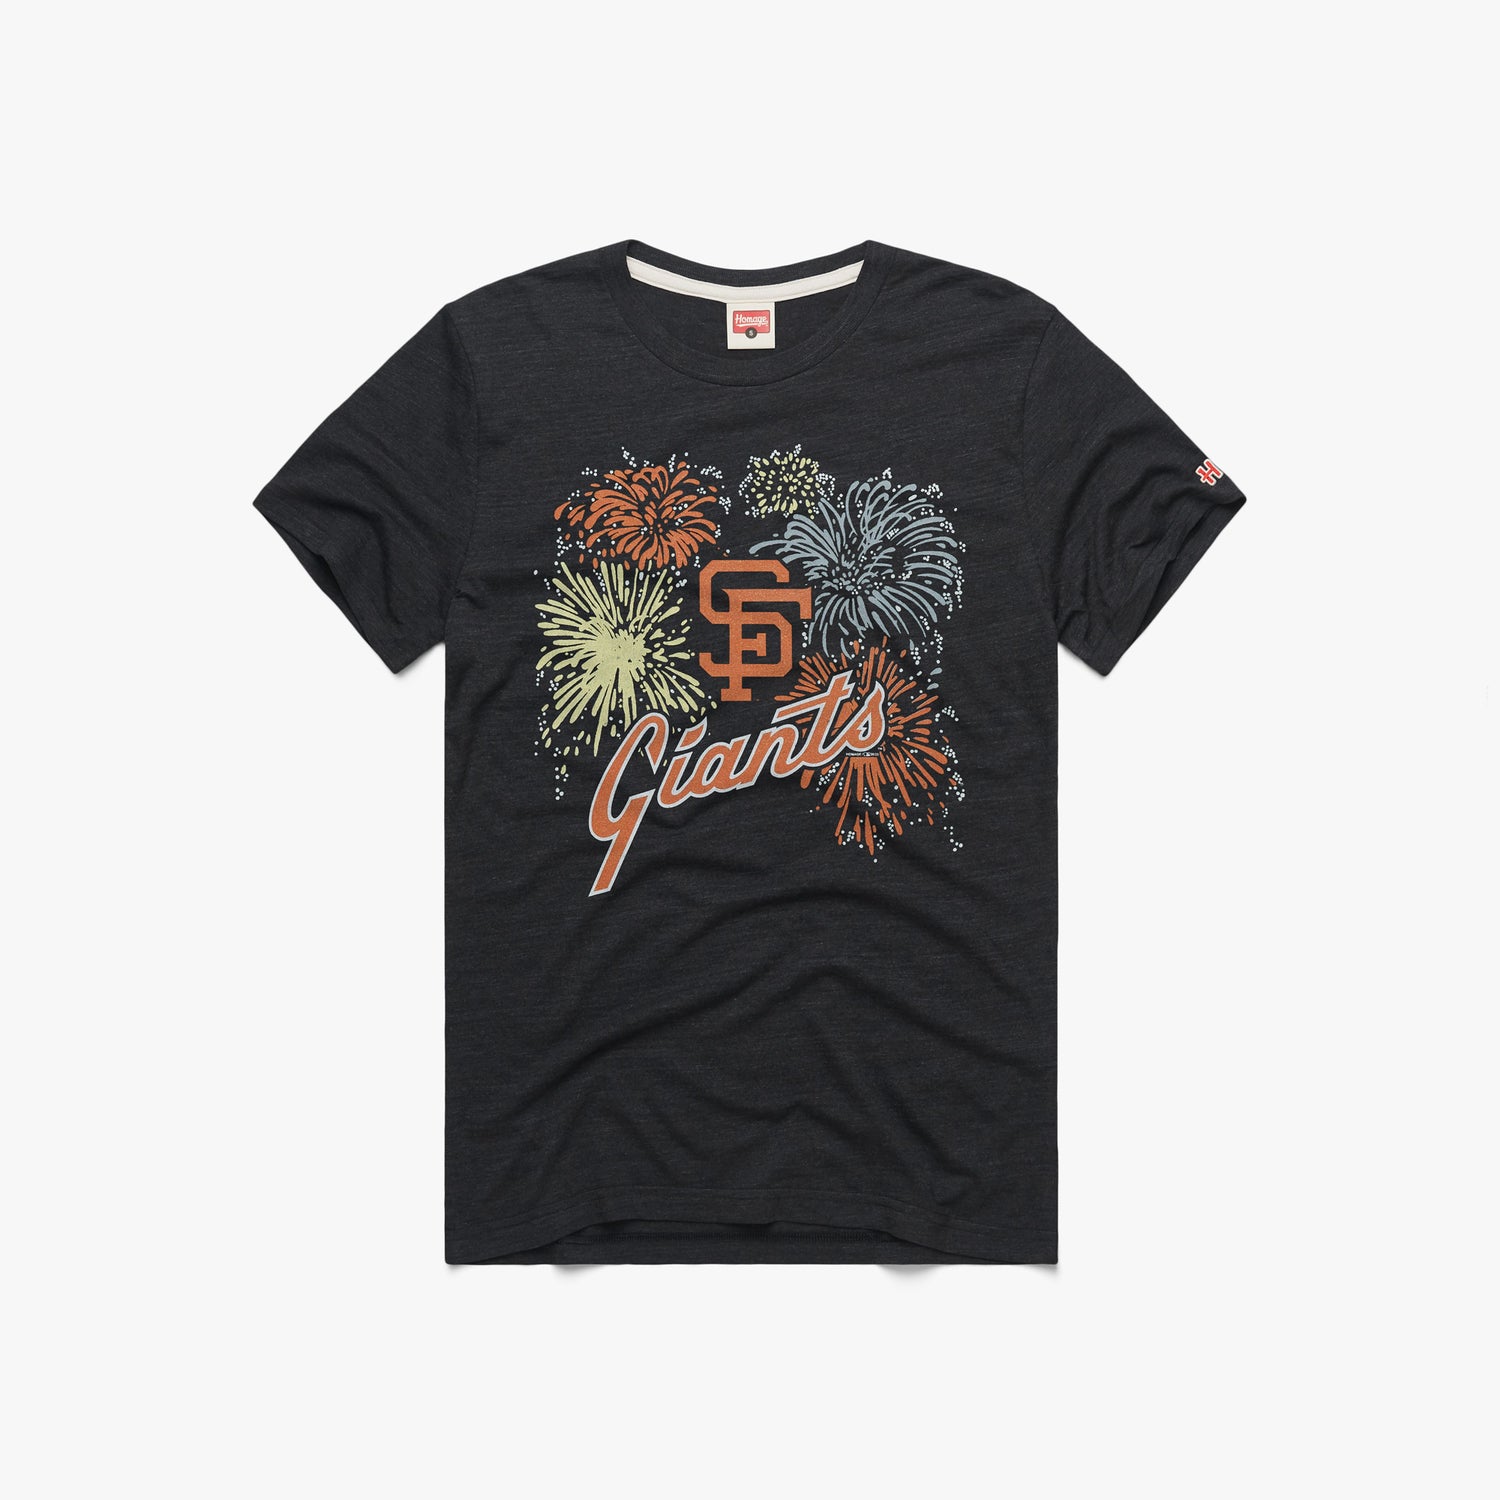 San Francisco Giants gear up for home opener